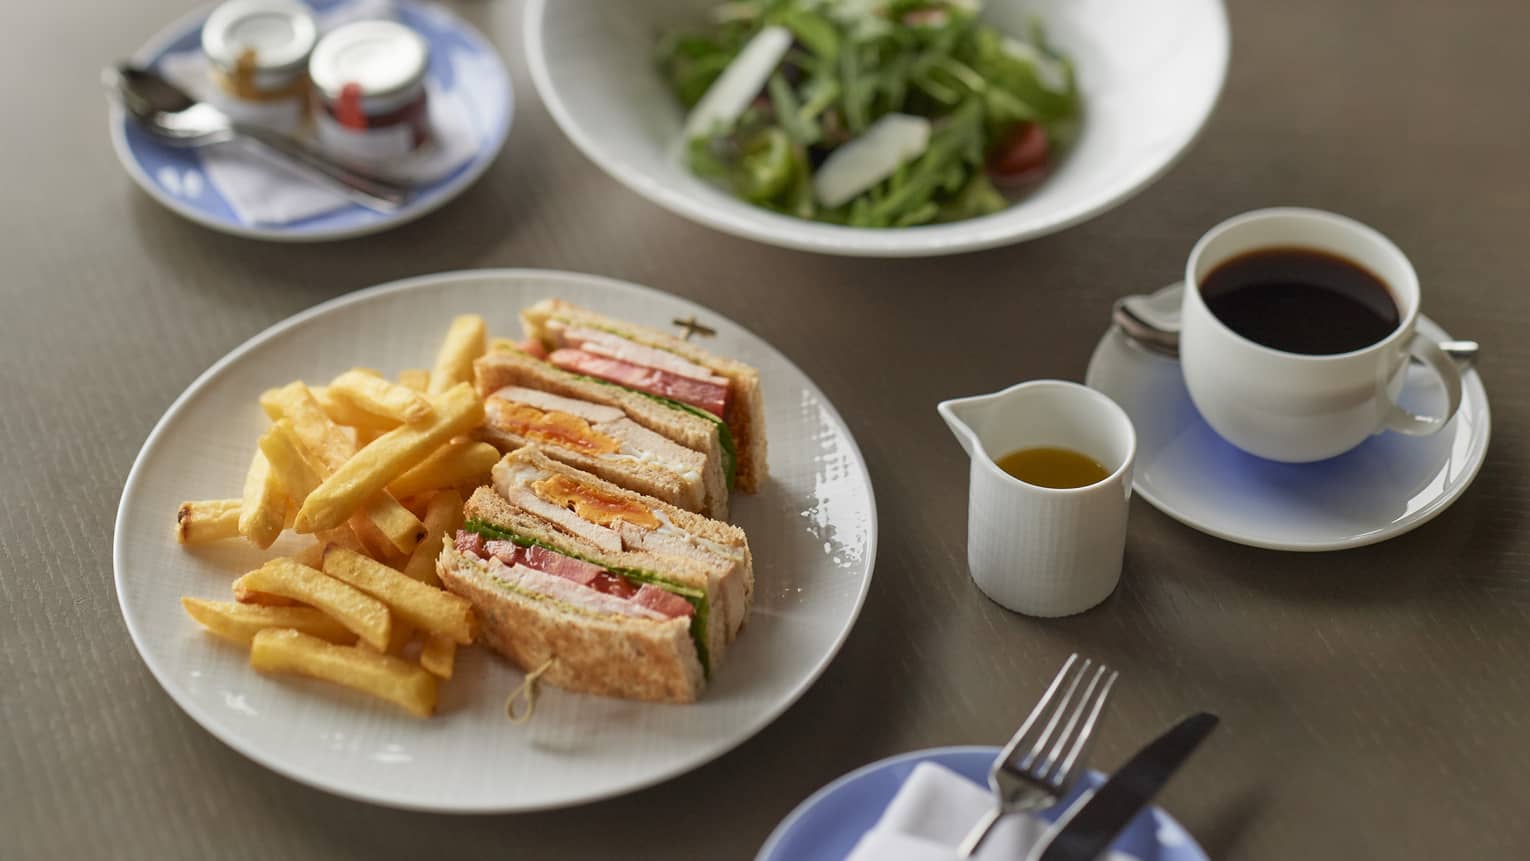 Club sandwich and French fries on round white plate, side salad in matching white bowl, mug of black coffee